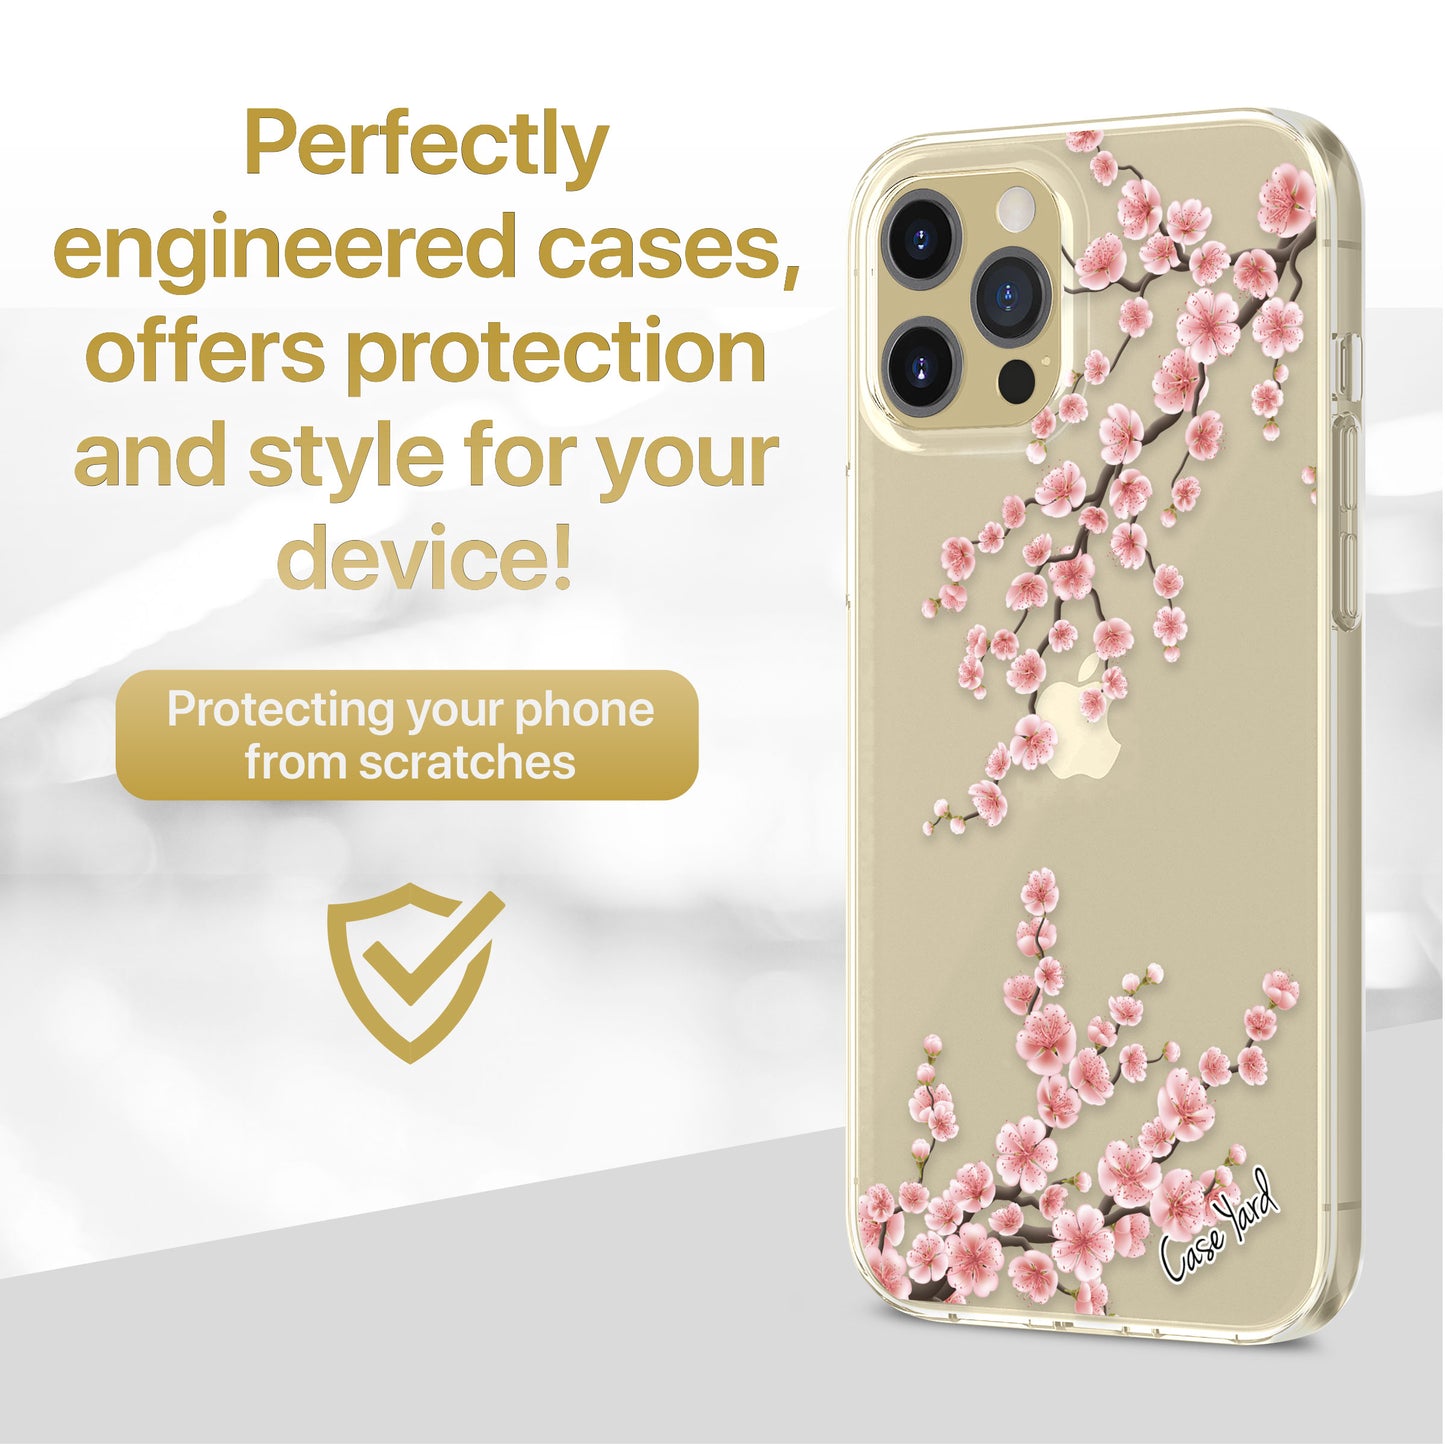 TPU Case Clear case with (Sakura Floral) Design for iPhone & Samsung Phones